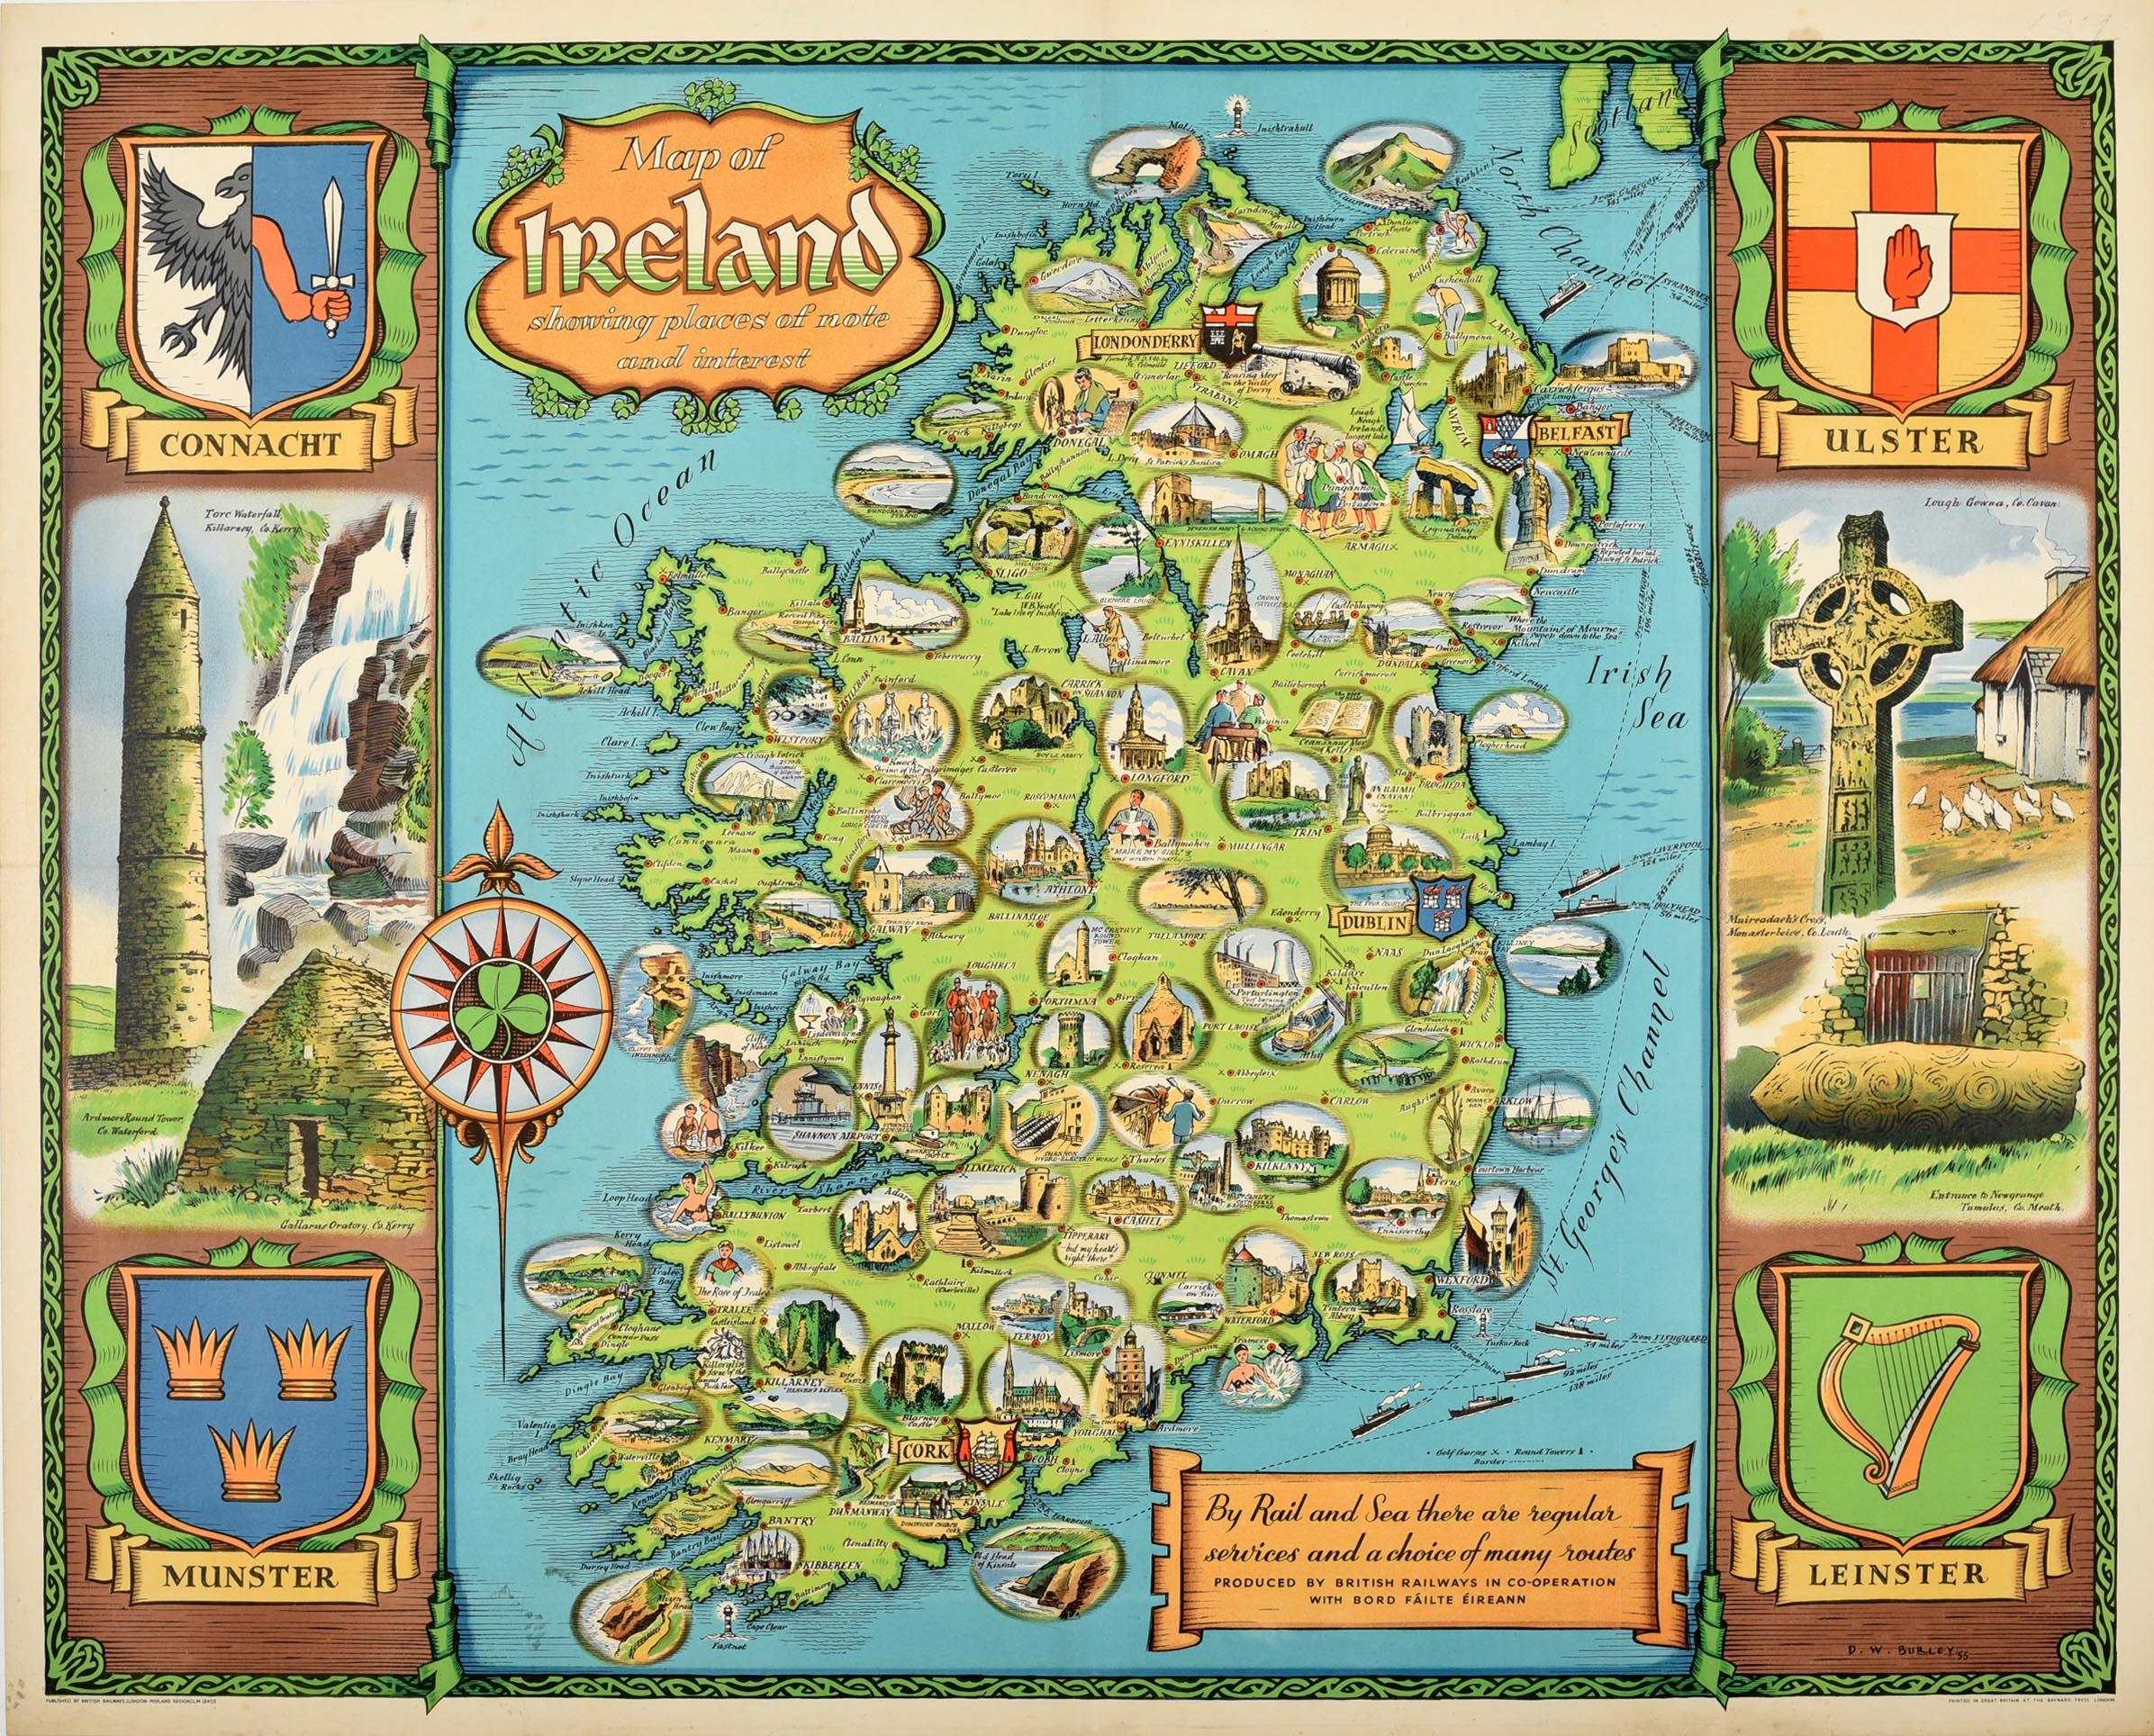 David William Burley Print - Original Vintage Travel Poster Map Of Ireland Showing Places Of Note & Interest